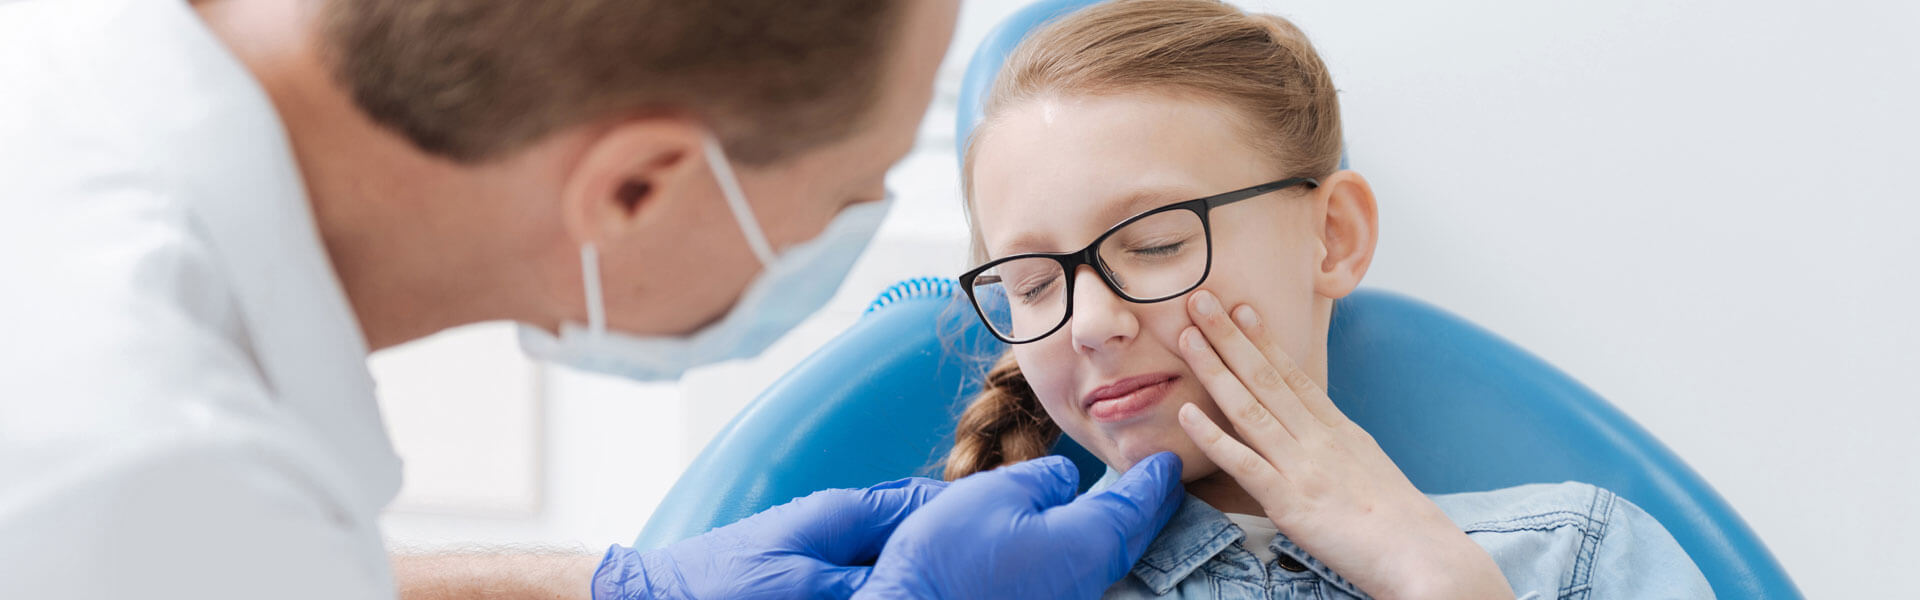 7 Tips for Dealing with a Dental Emergency